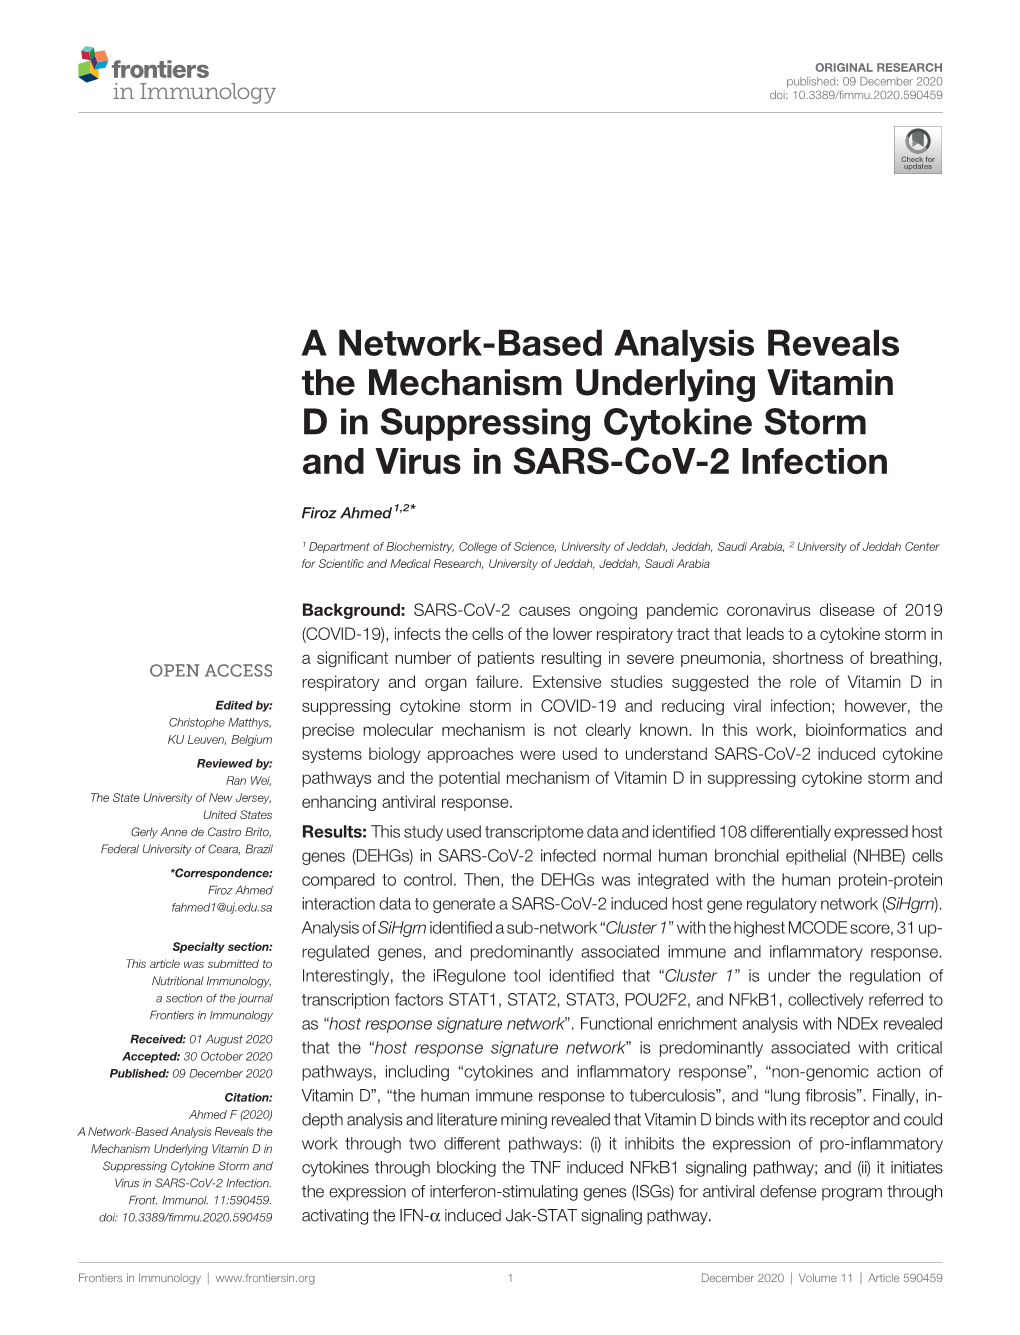 A Network-Based Analysis Reveals the Mechanism Underlying Vitamin D in Suppressing Cytokine Storm and Virus in SARS-Cov-2 Infection